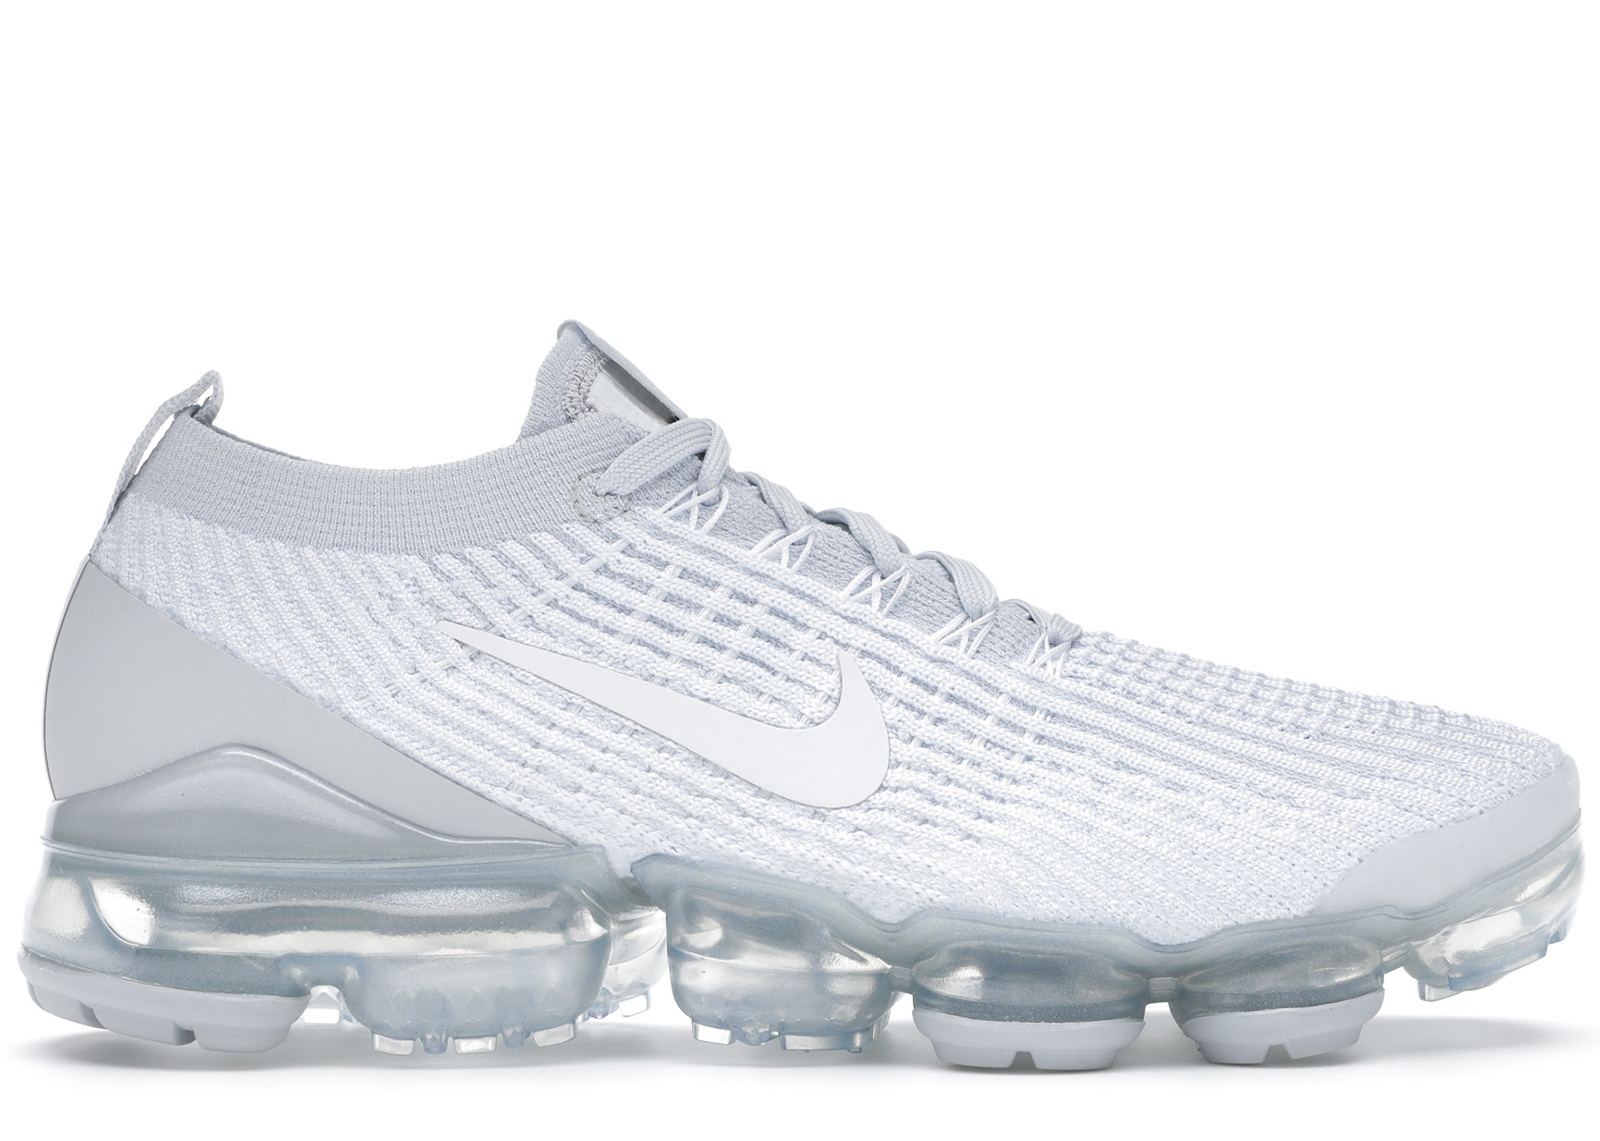 Buy Nike Air Max VaporMax Shoes & Deadstock Sneakers شامبو اغادير